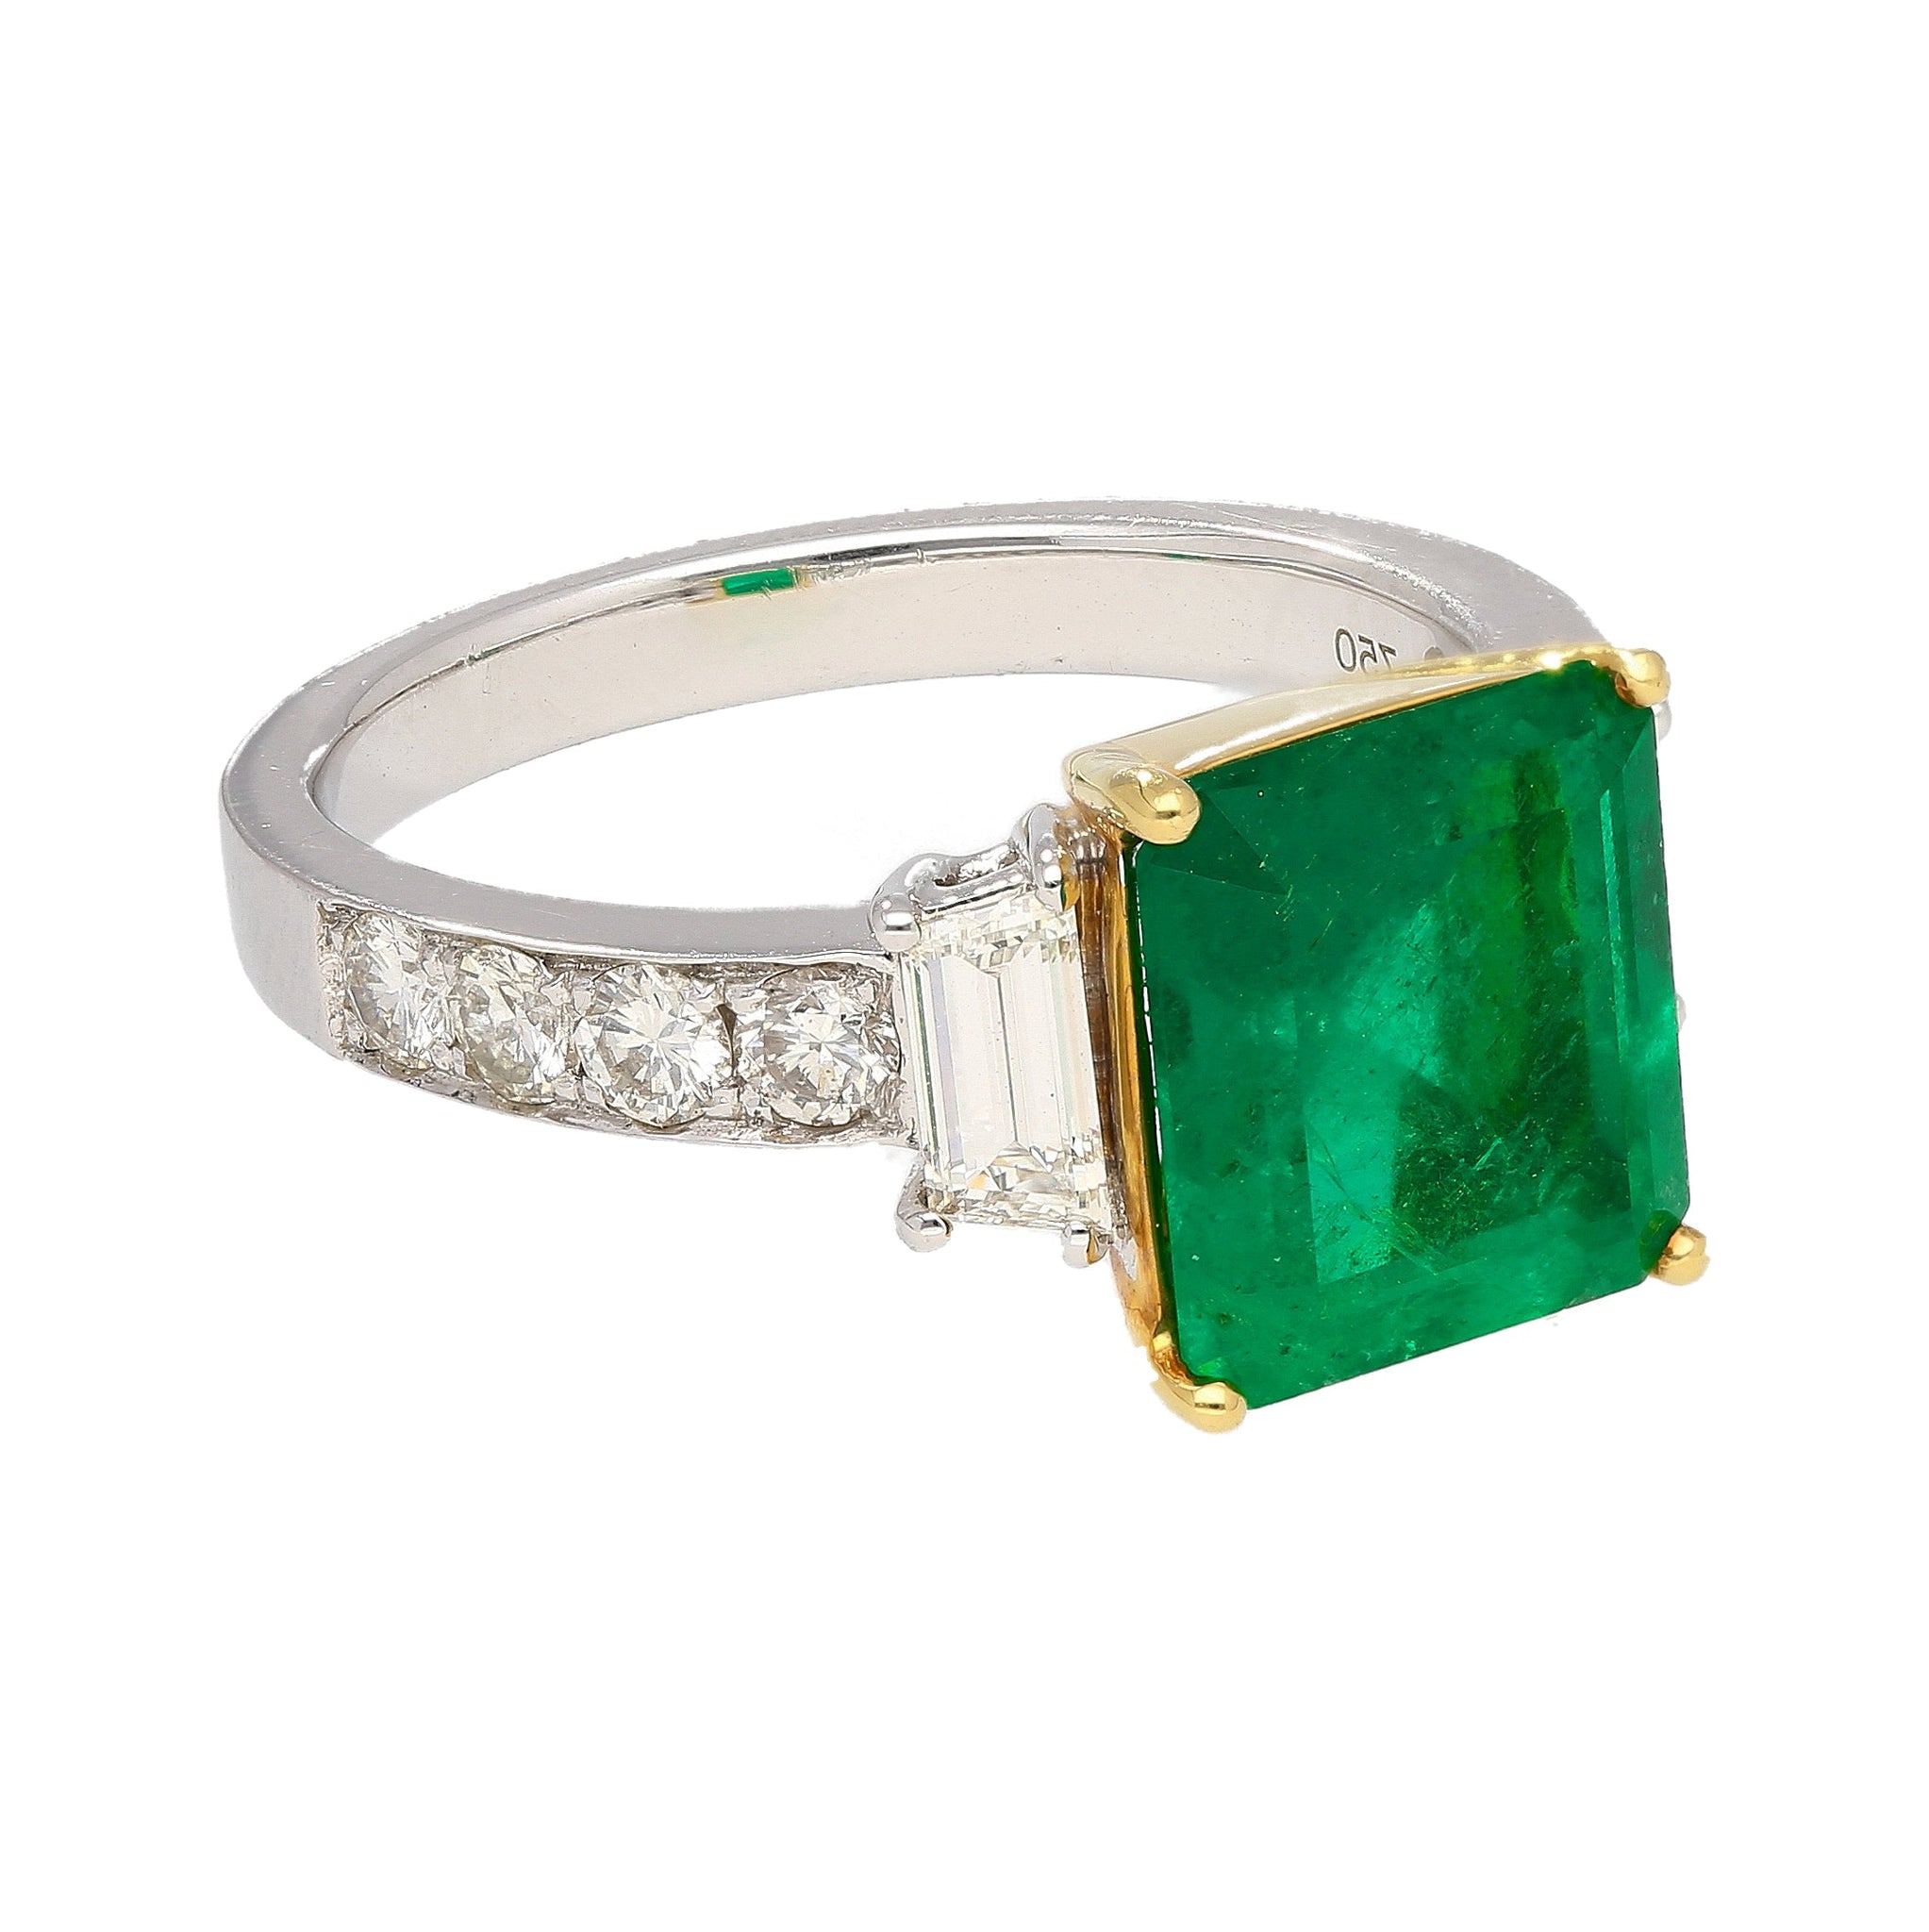 GRS Certified 3.16 Carat Vivid Green Minor Oil Colombia Emerald and Diamond 18K Ring | GRS Appendix.